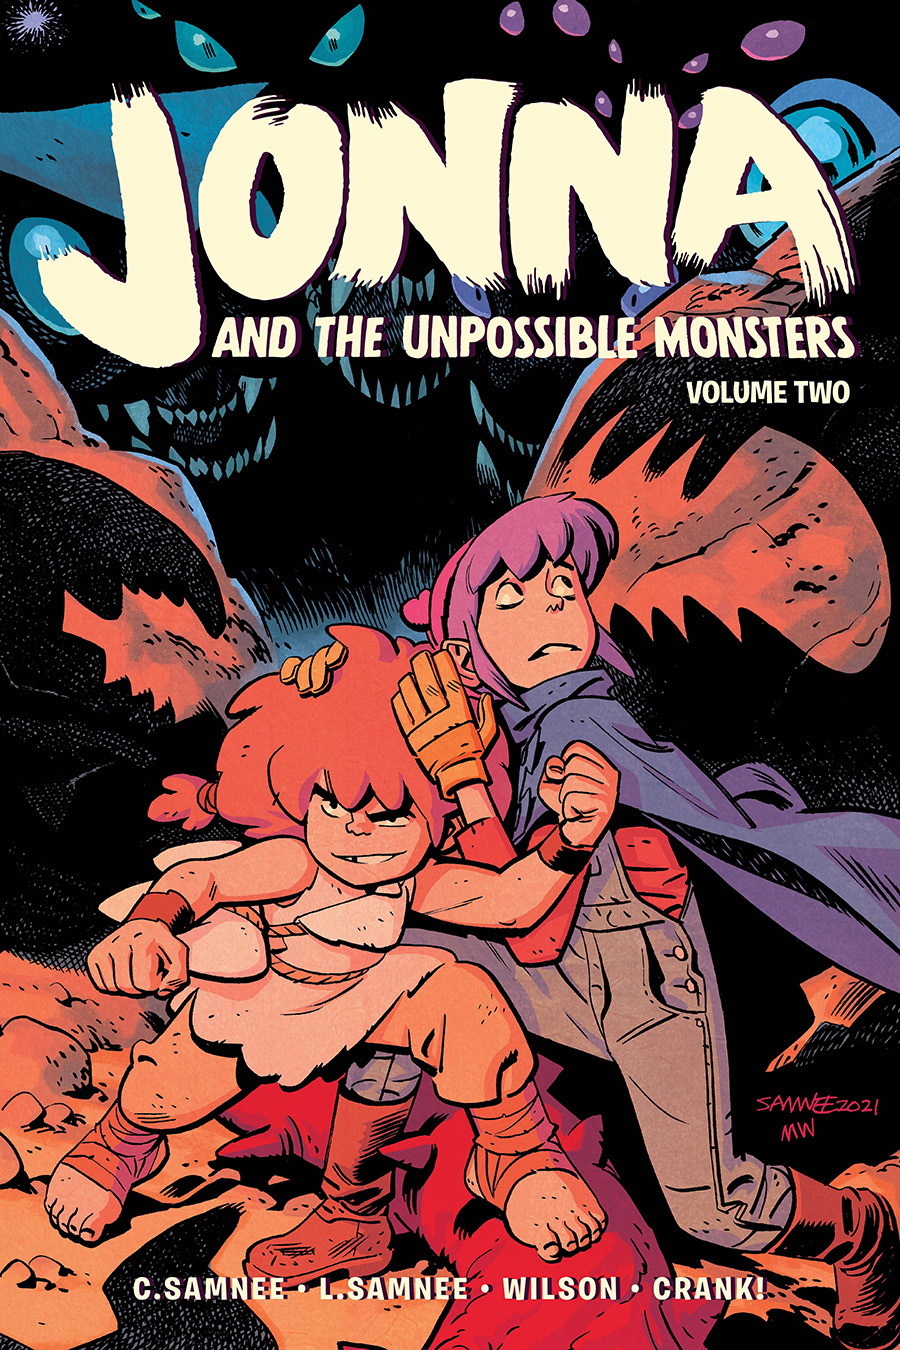 Jonna And The Unpossible Monsters Vol 2 TP